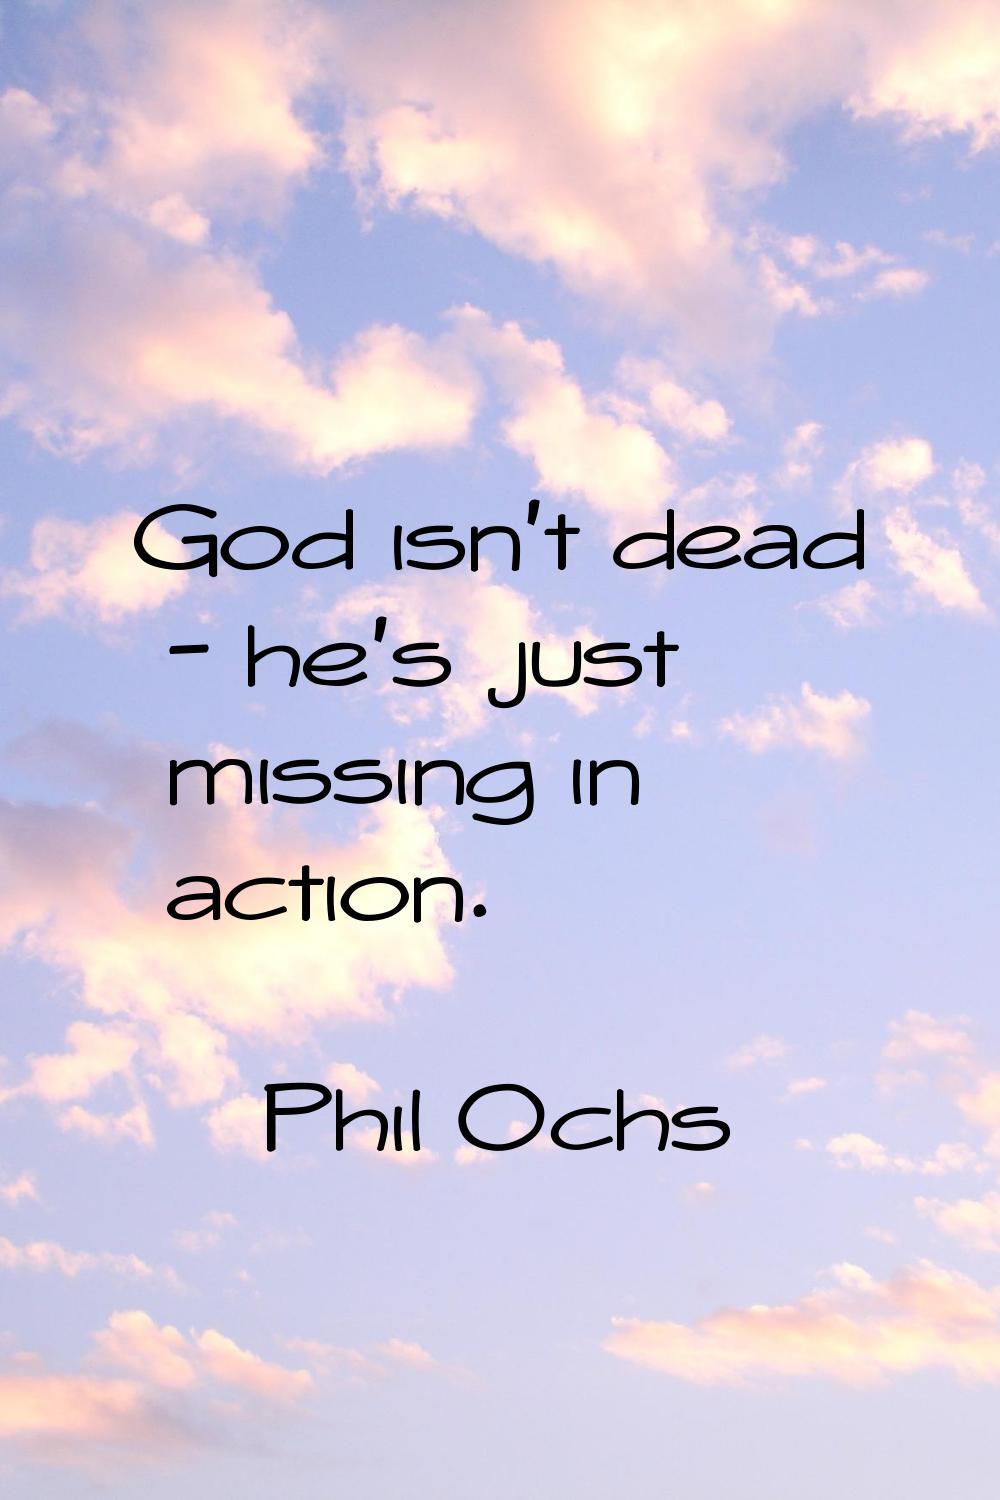 God isn't dead - he's just missing in action.